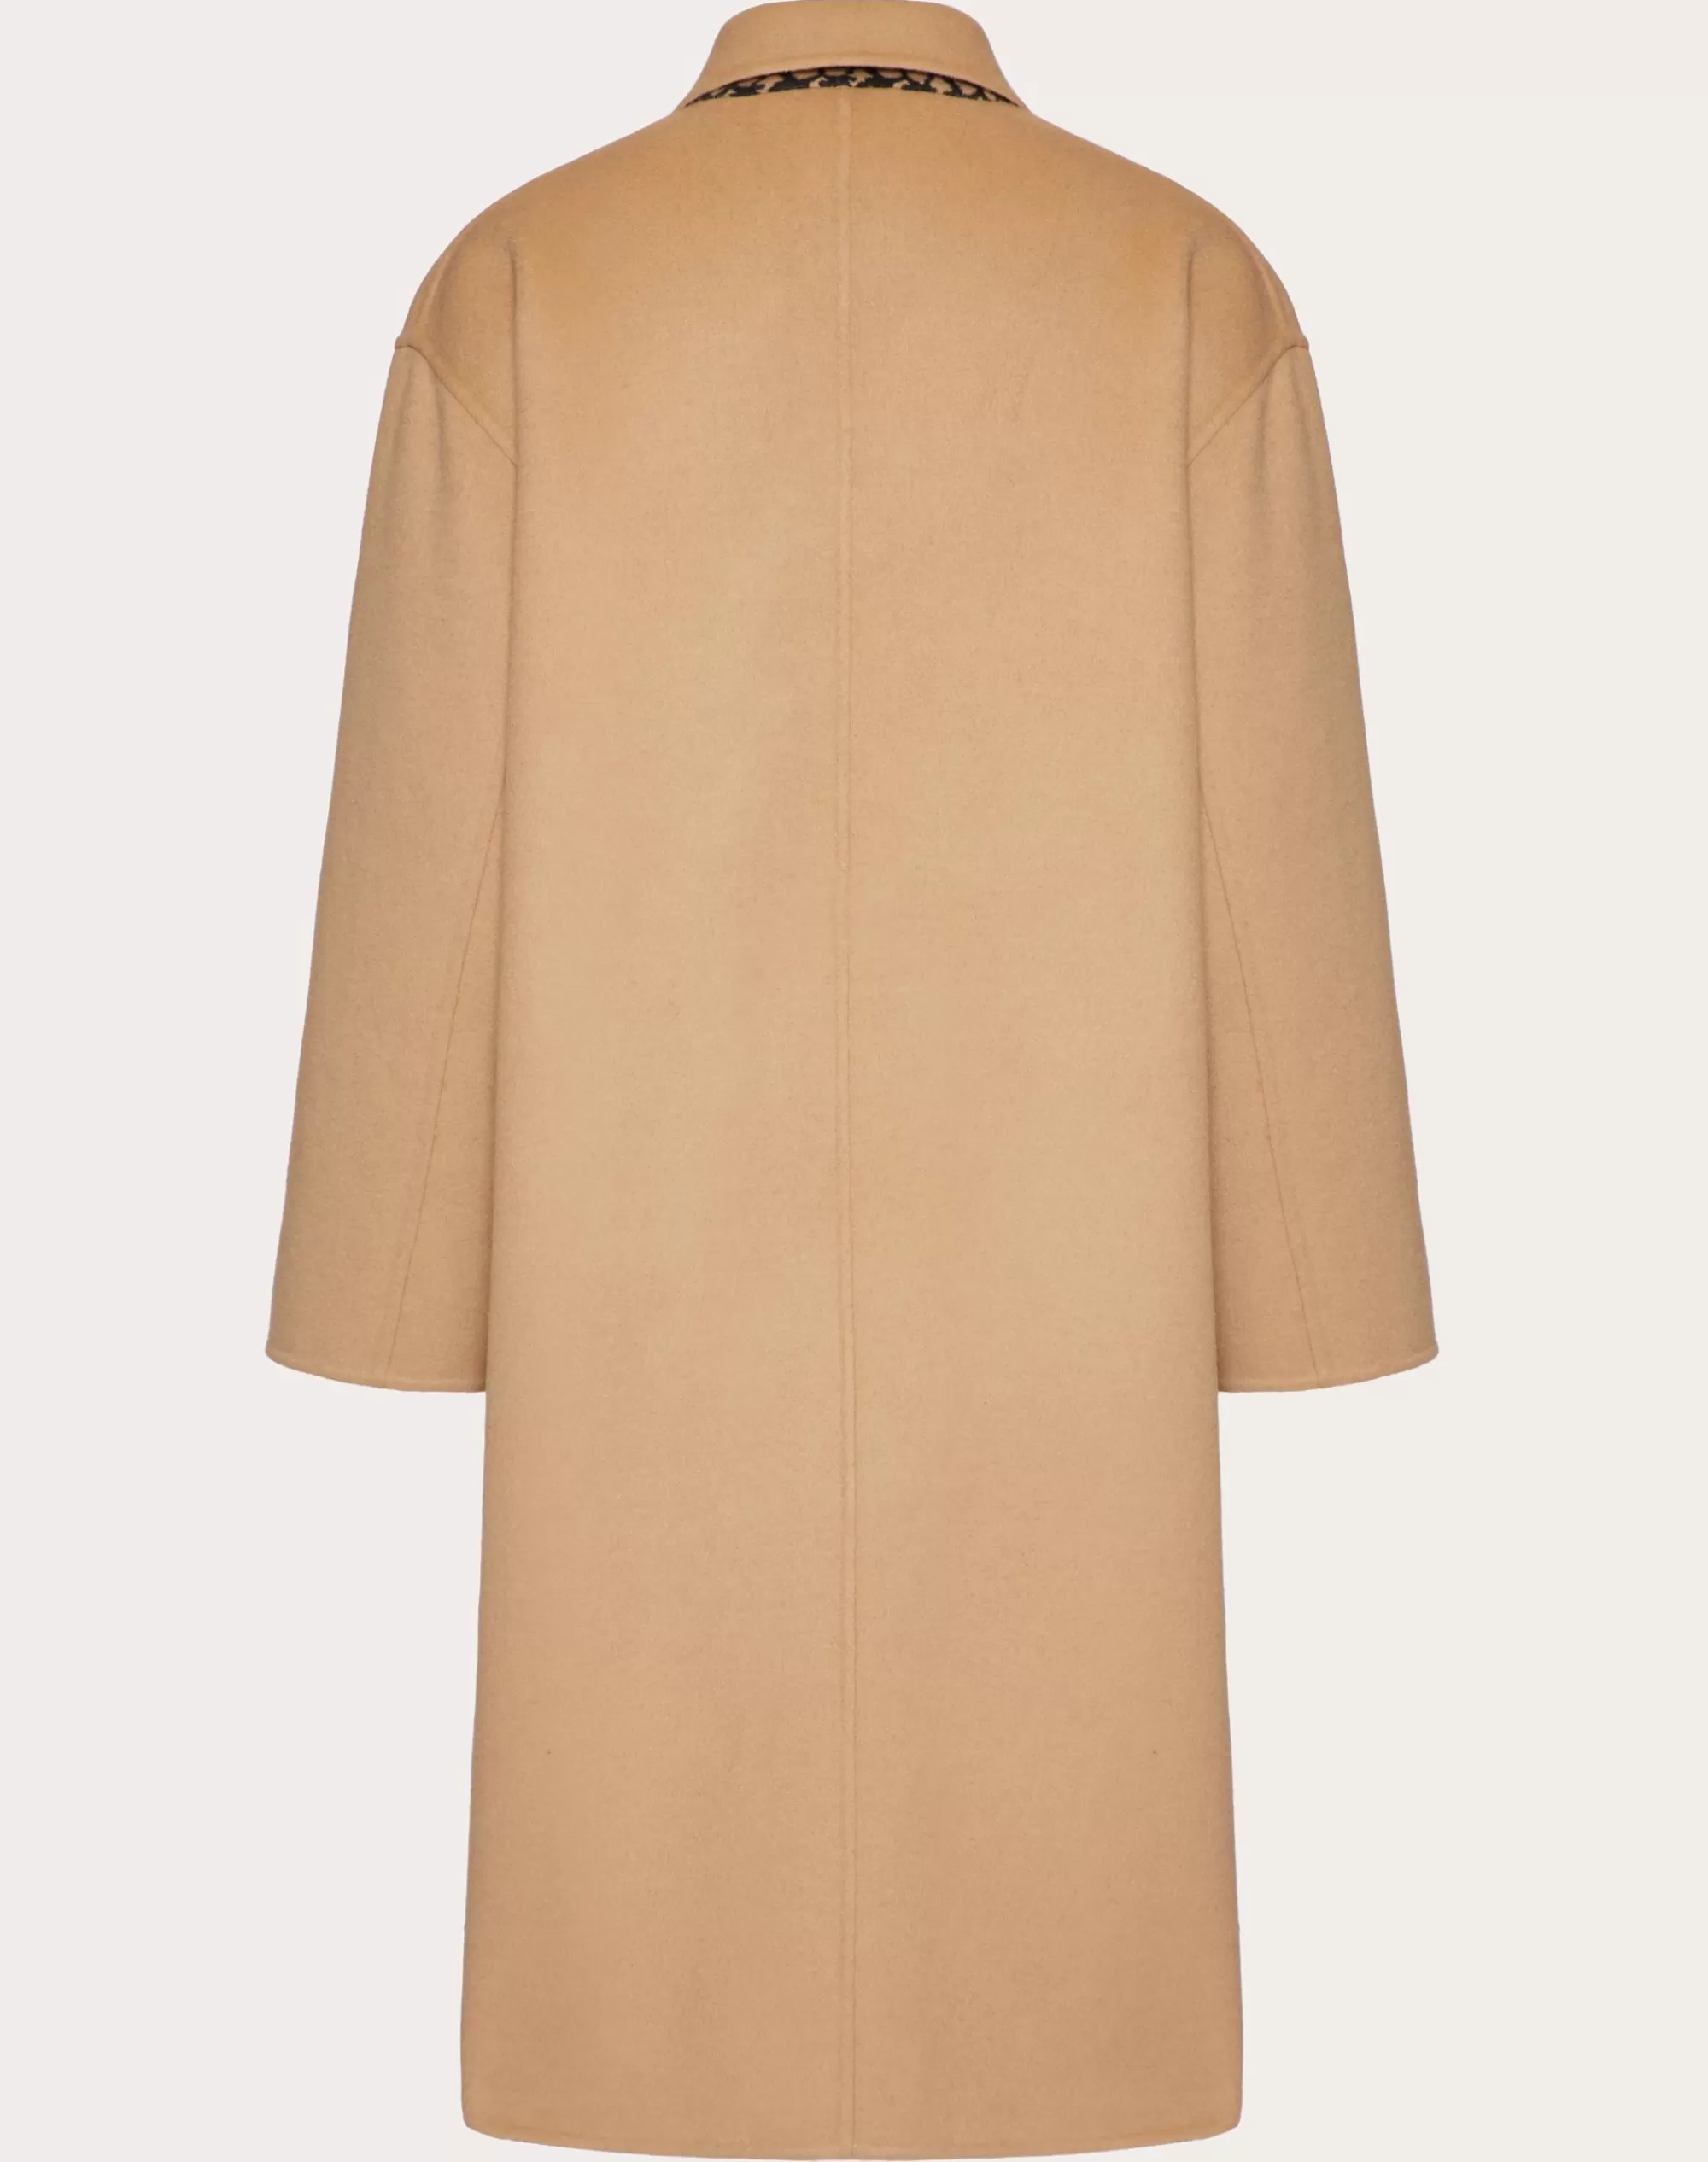 Valentino REVERSIBLE DOUBLE-FACED WOOL COAT WITH TOILE ICONOGRAPHE PATTERN Camel Cheap